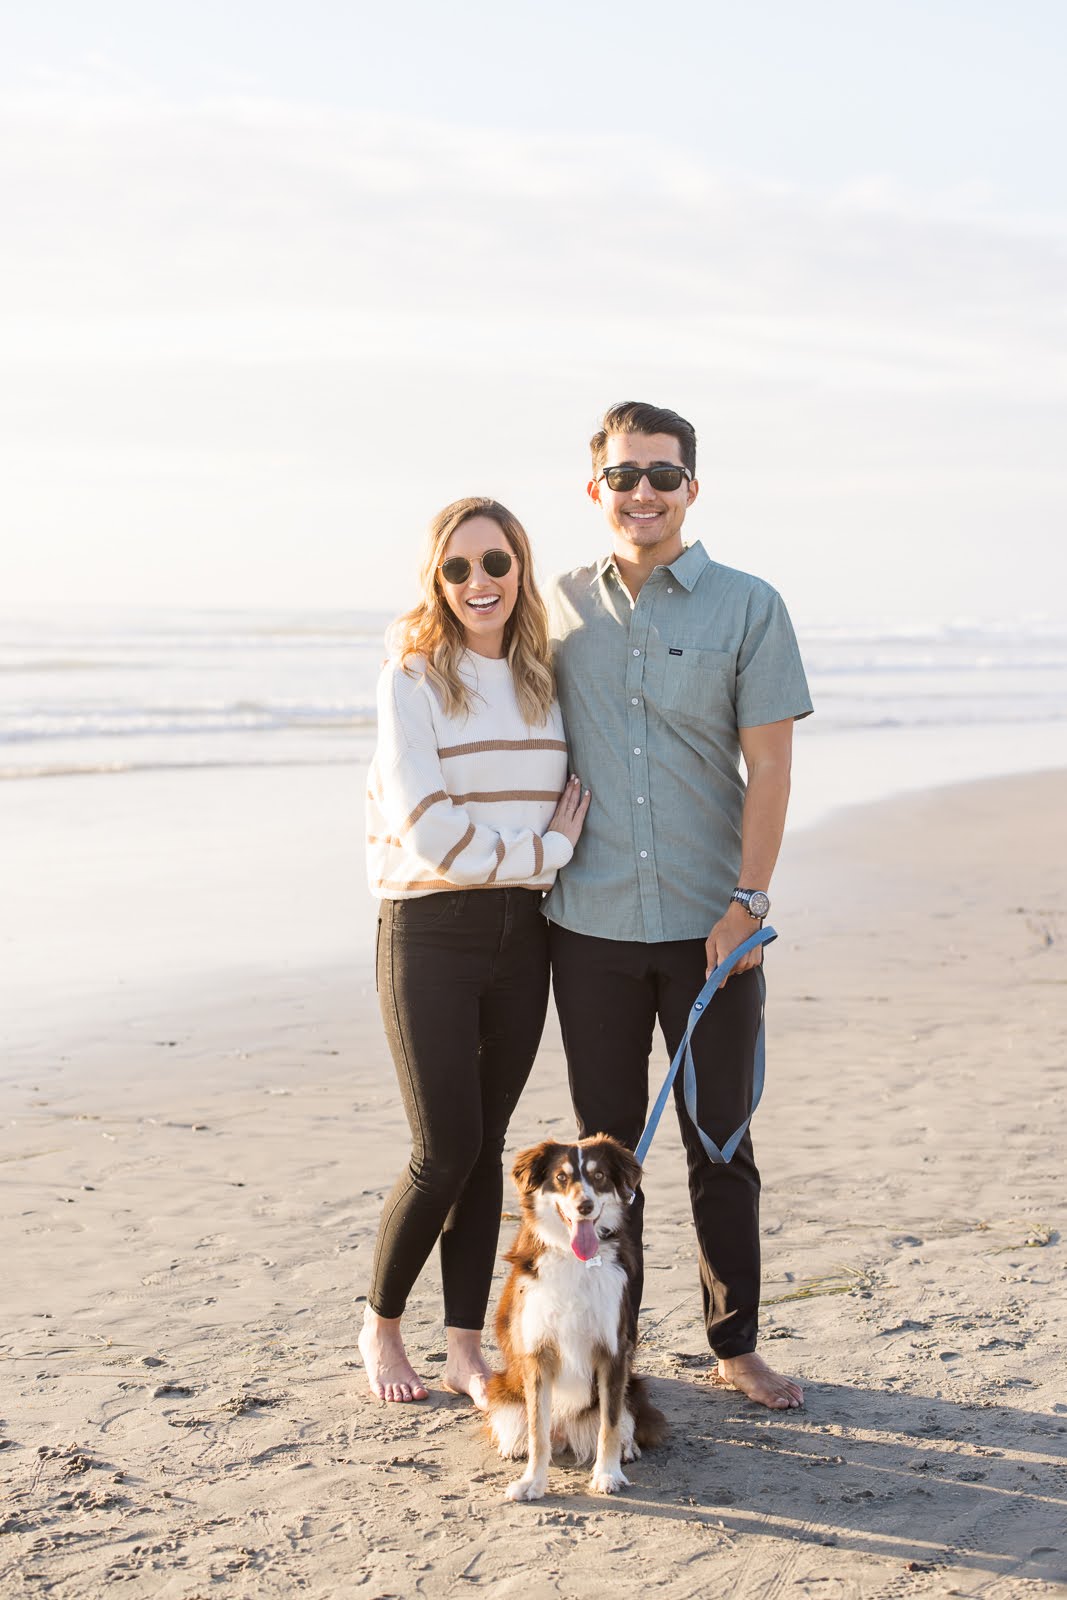 Kellen, hubby, and their dog smiling at the camera during their Meg Marie photography session on the beach. 